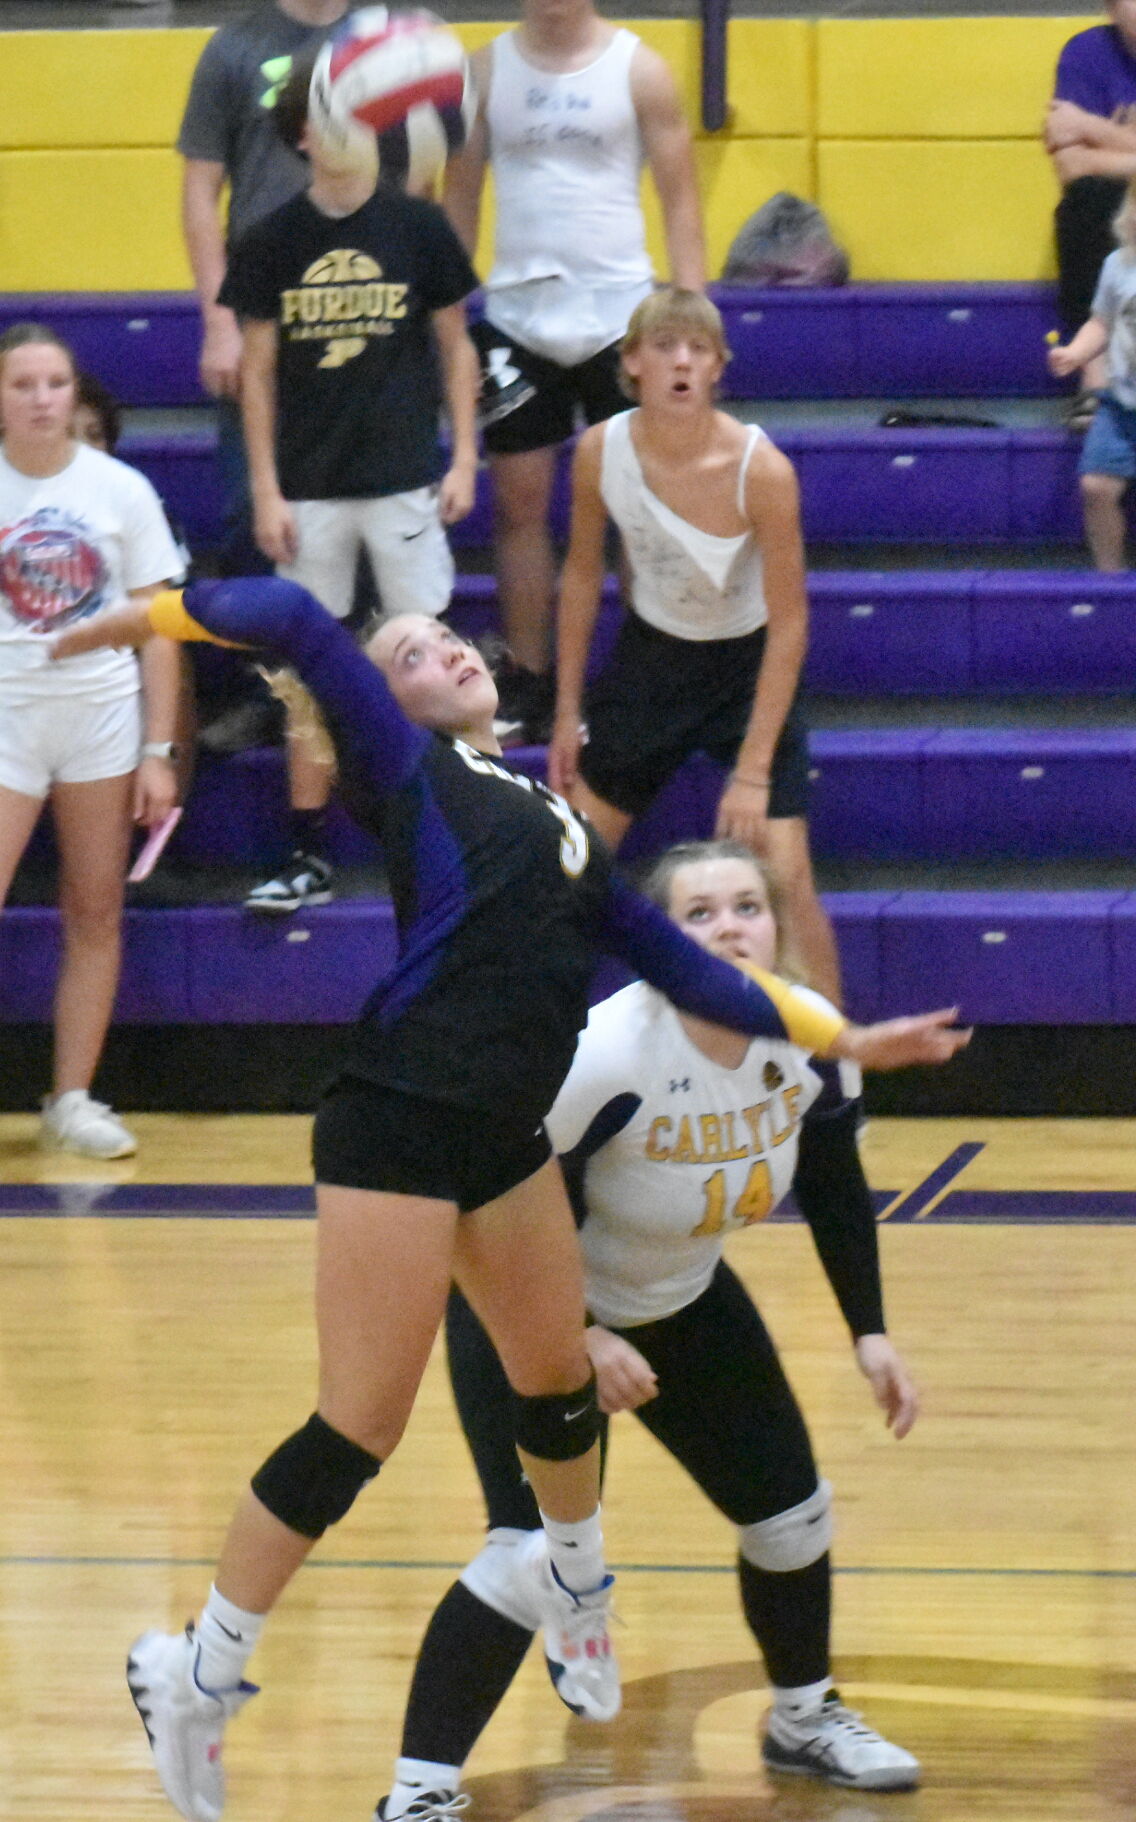 Carlyle volleyball team moves to 3-1 in conference